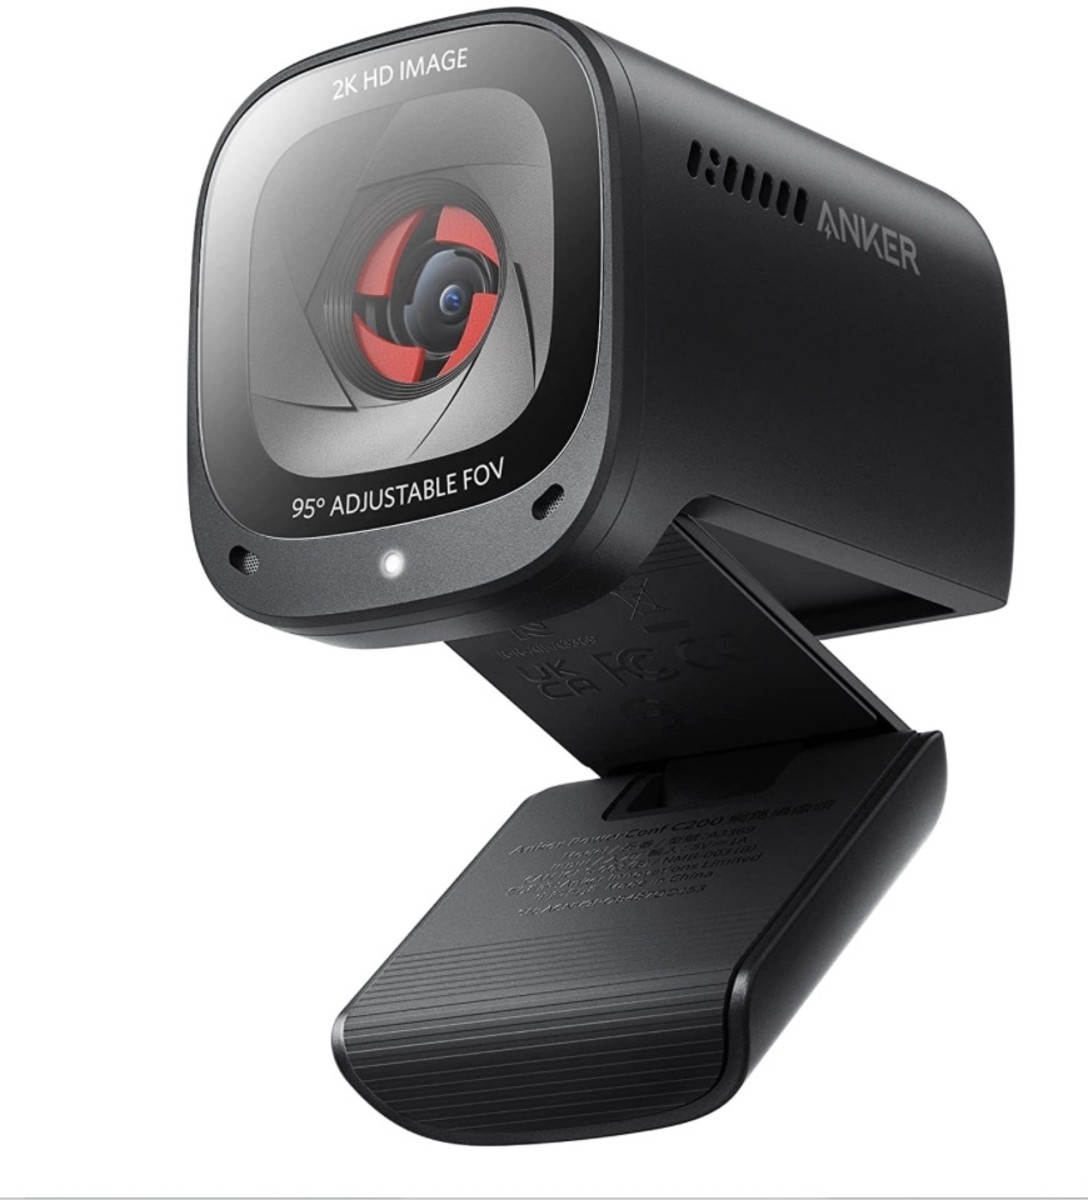 ankers-powerconf-c200-2k-hd-webcam-puts-out-a-lot-of-view-for-little-cost